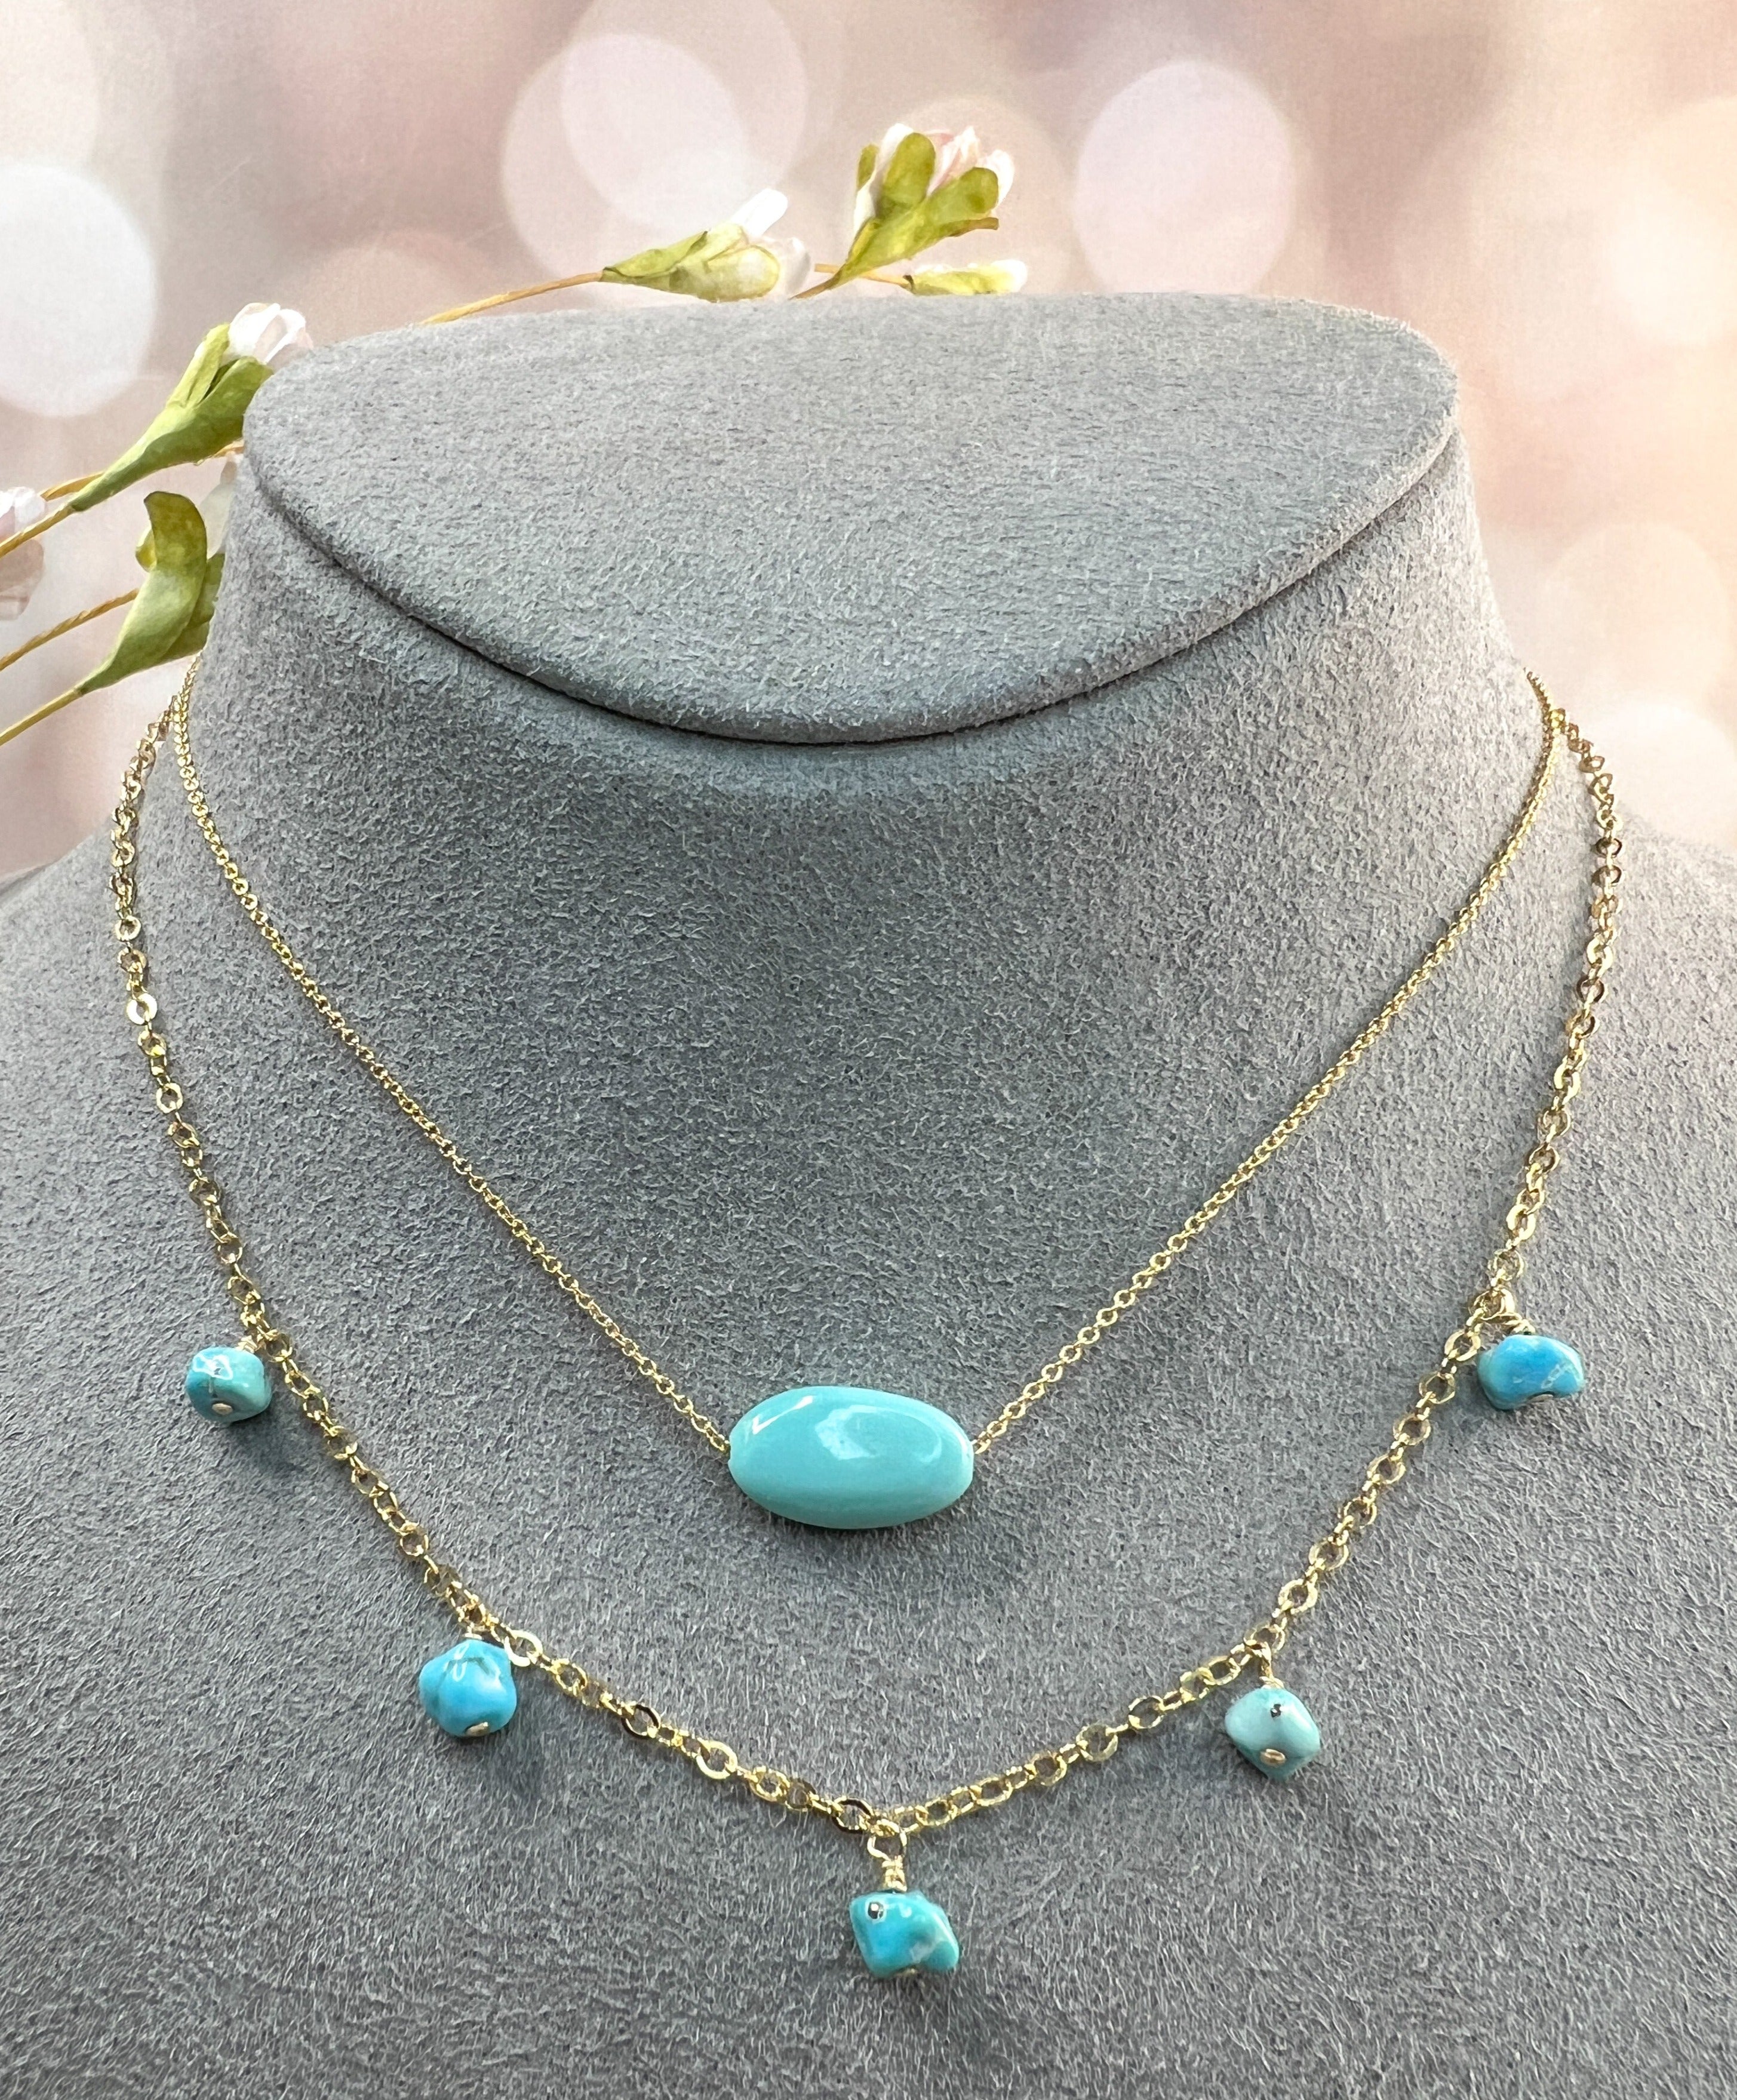 Oval Sleeping Beauty Turquoise Necklace by Margaret Solow - NEWTWIST